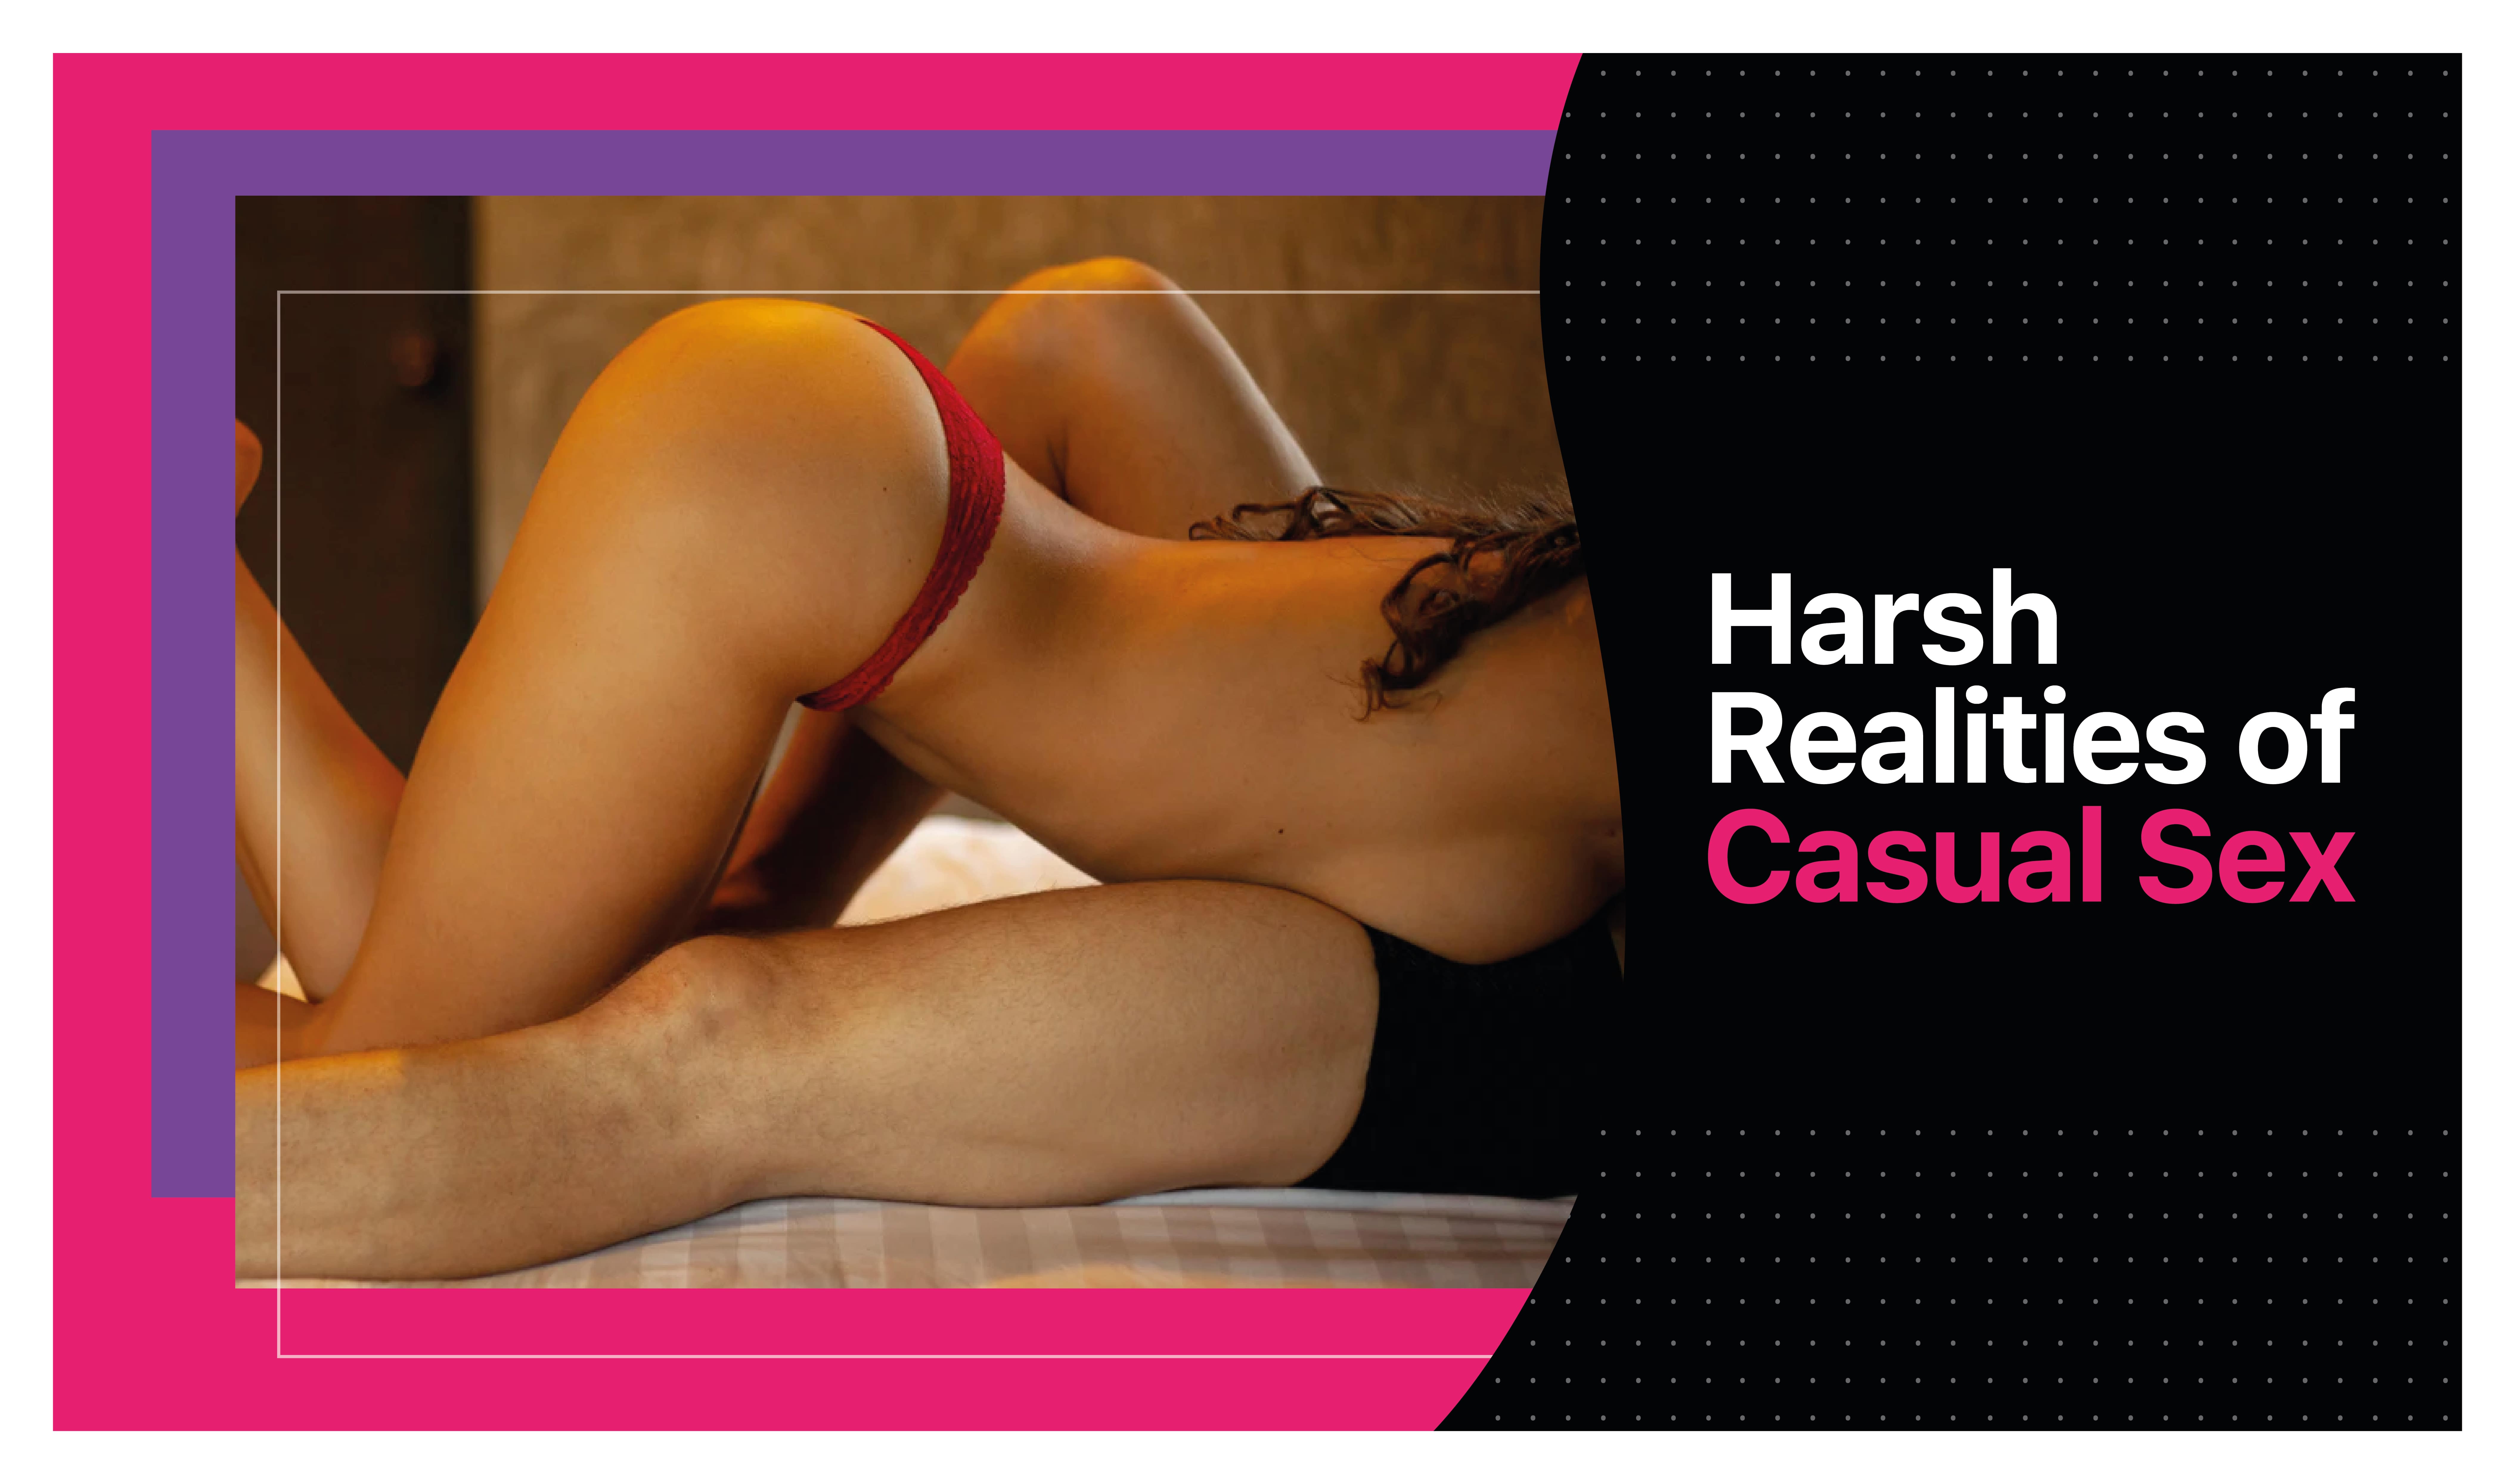 5 HARSH REALITIES OF CASUAL SEX